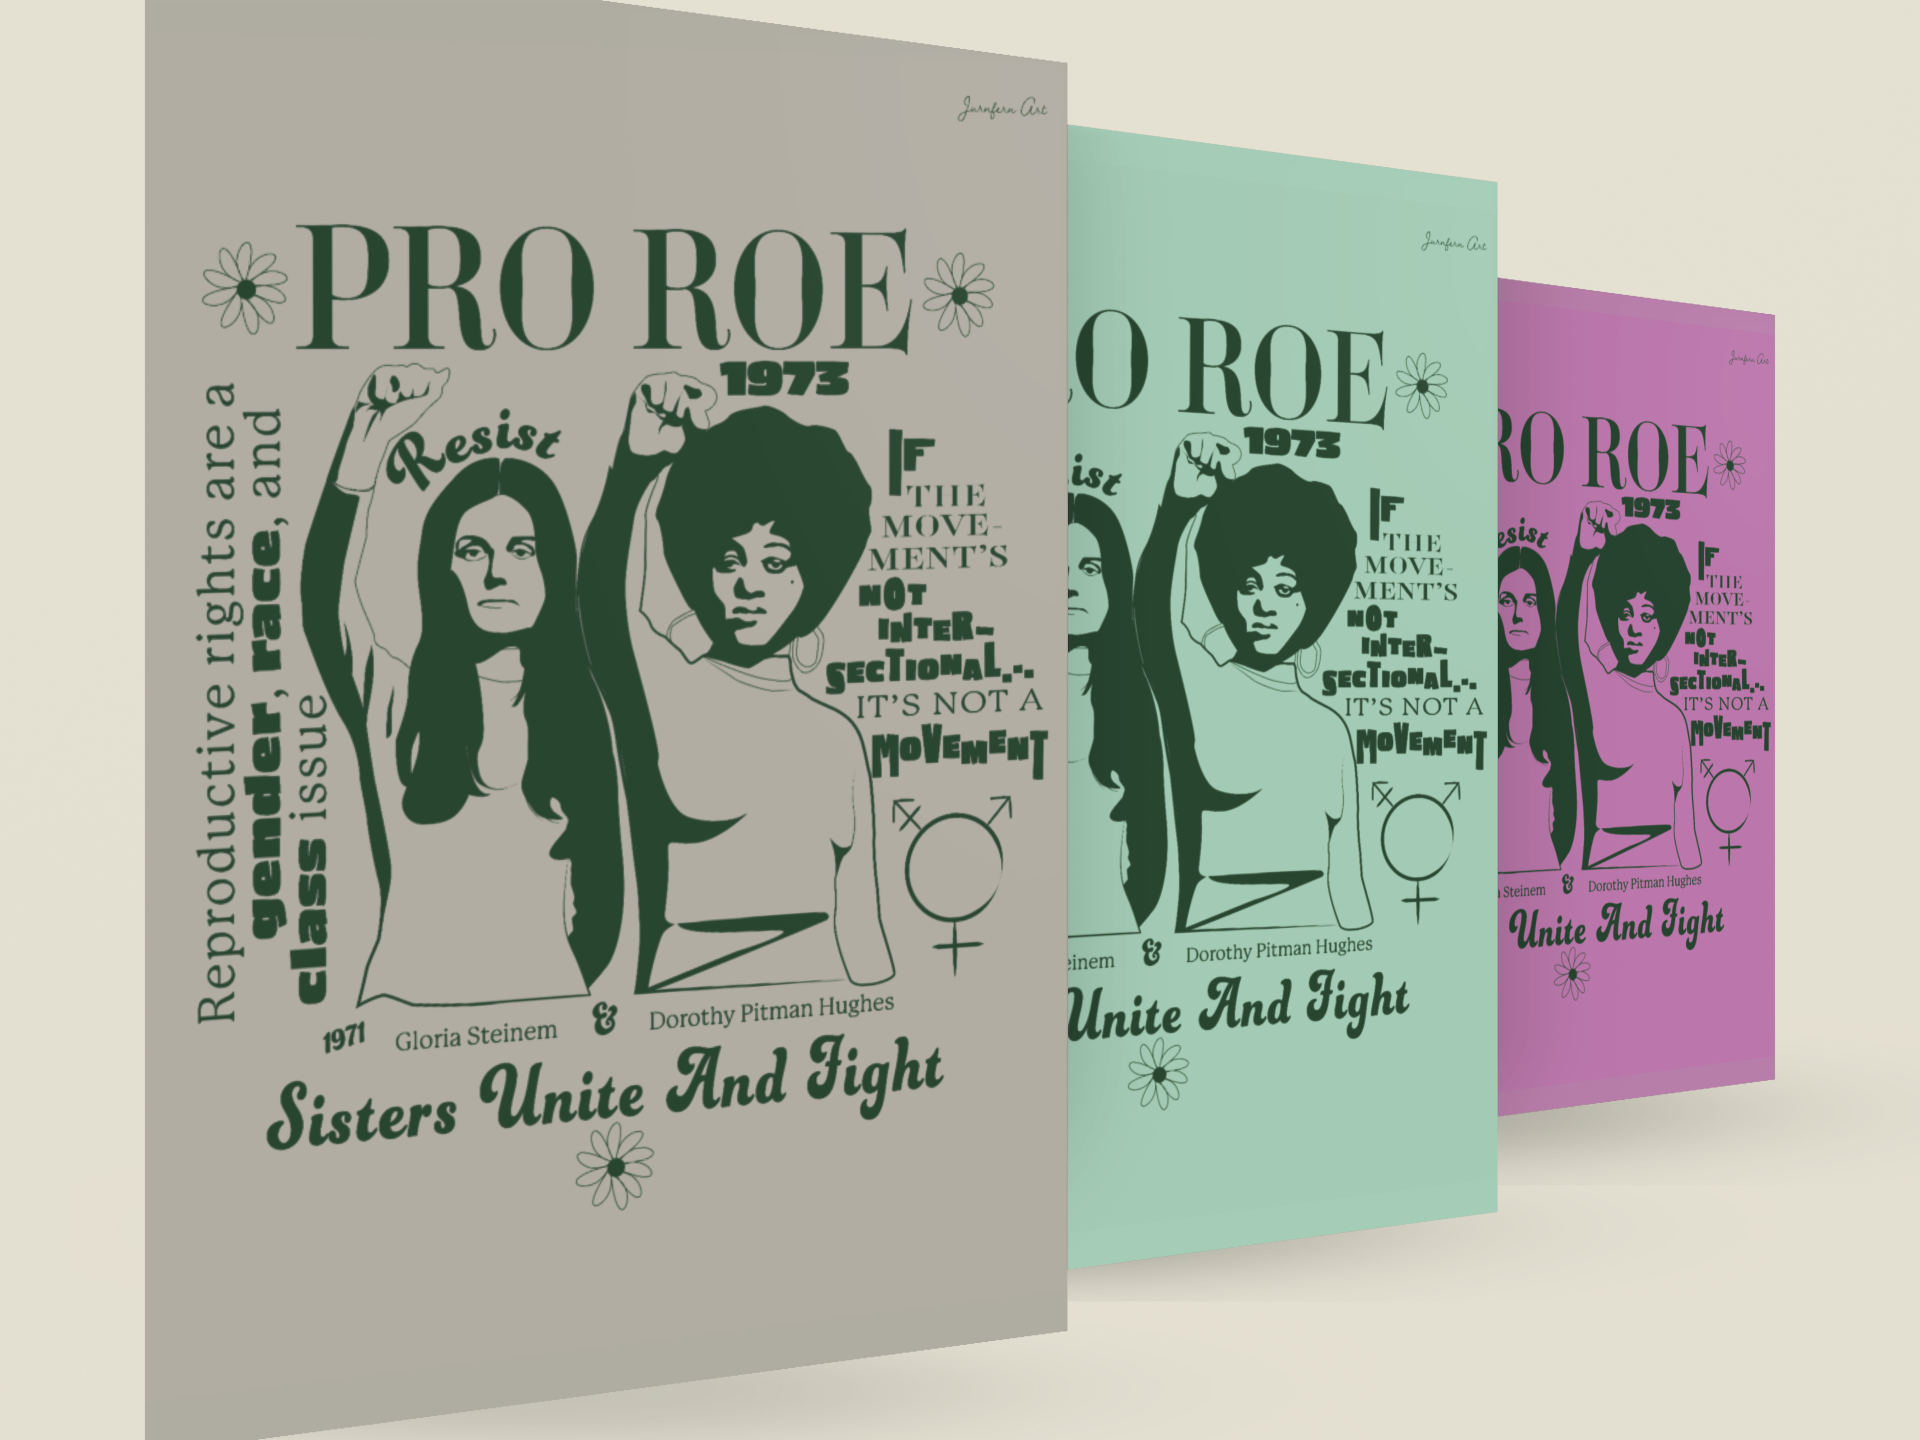 Three posters each in a different color and an image of activists Gloria Steinem and Dorothy Pitman Hughes and text that reads "PRO ROE" on them